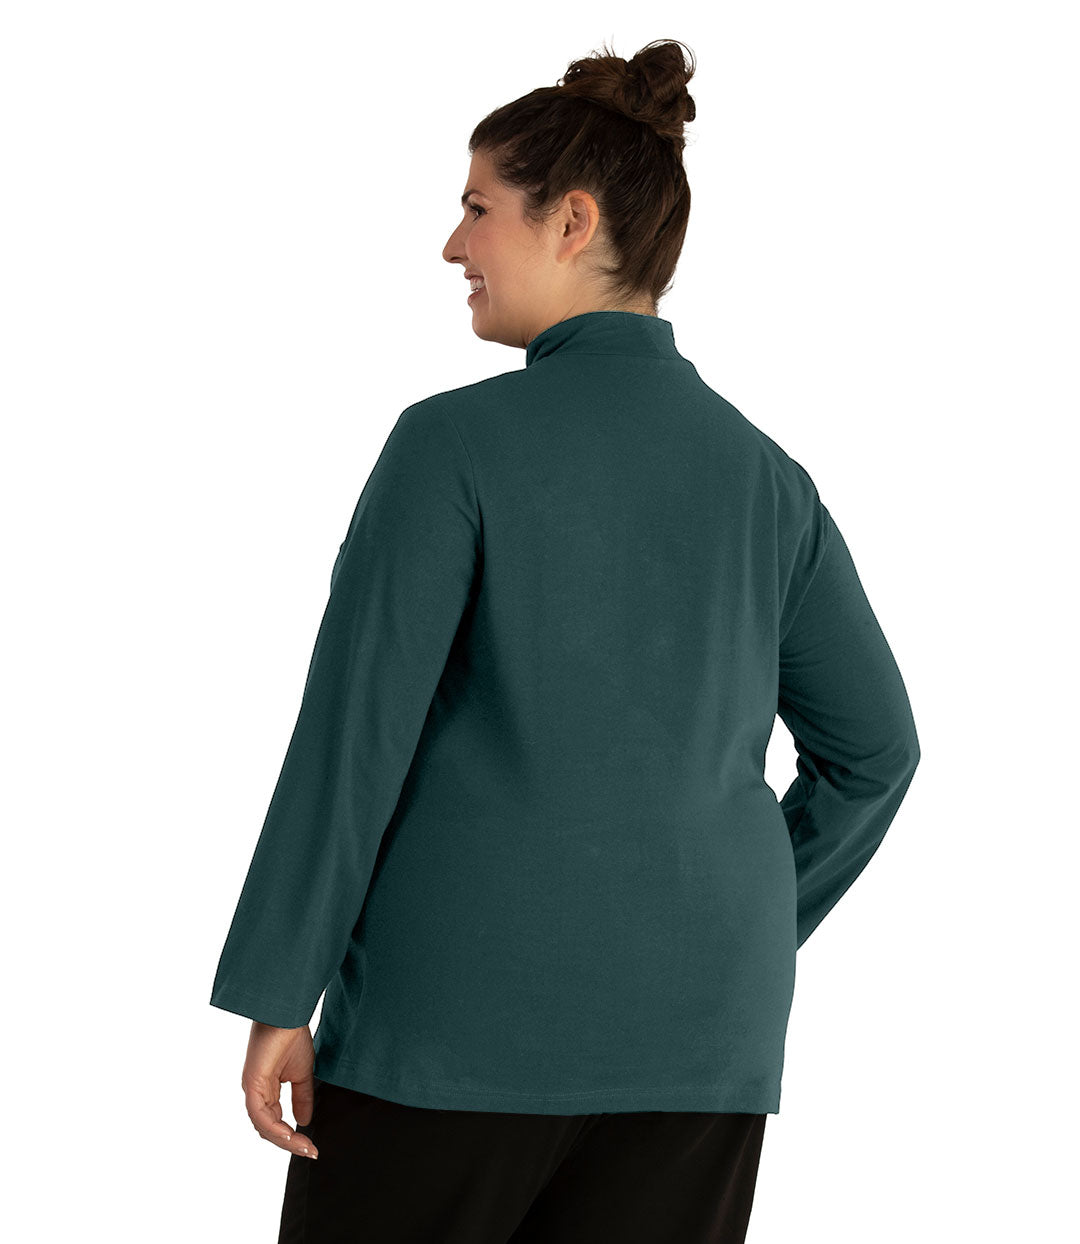 Plus size woman, facing back looking left, wearing JunoActive plus size Stretch Naturals Lite Mock Neck Top in the color Spruce. She is wearing JunoActive Plus Size Leggings in the color Black.